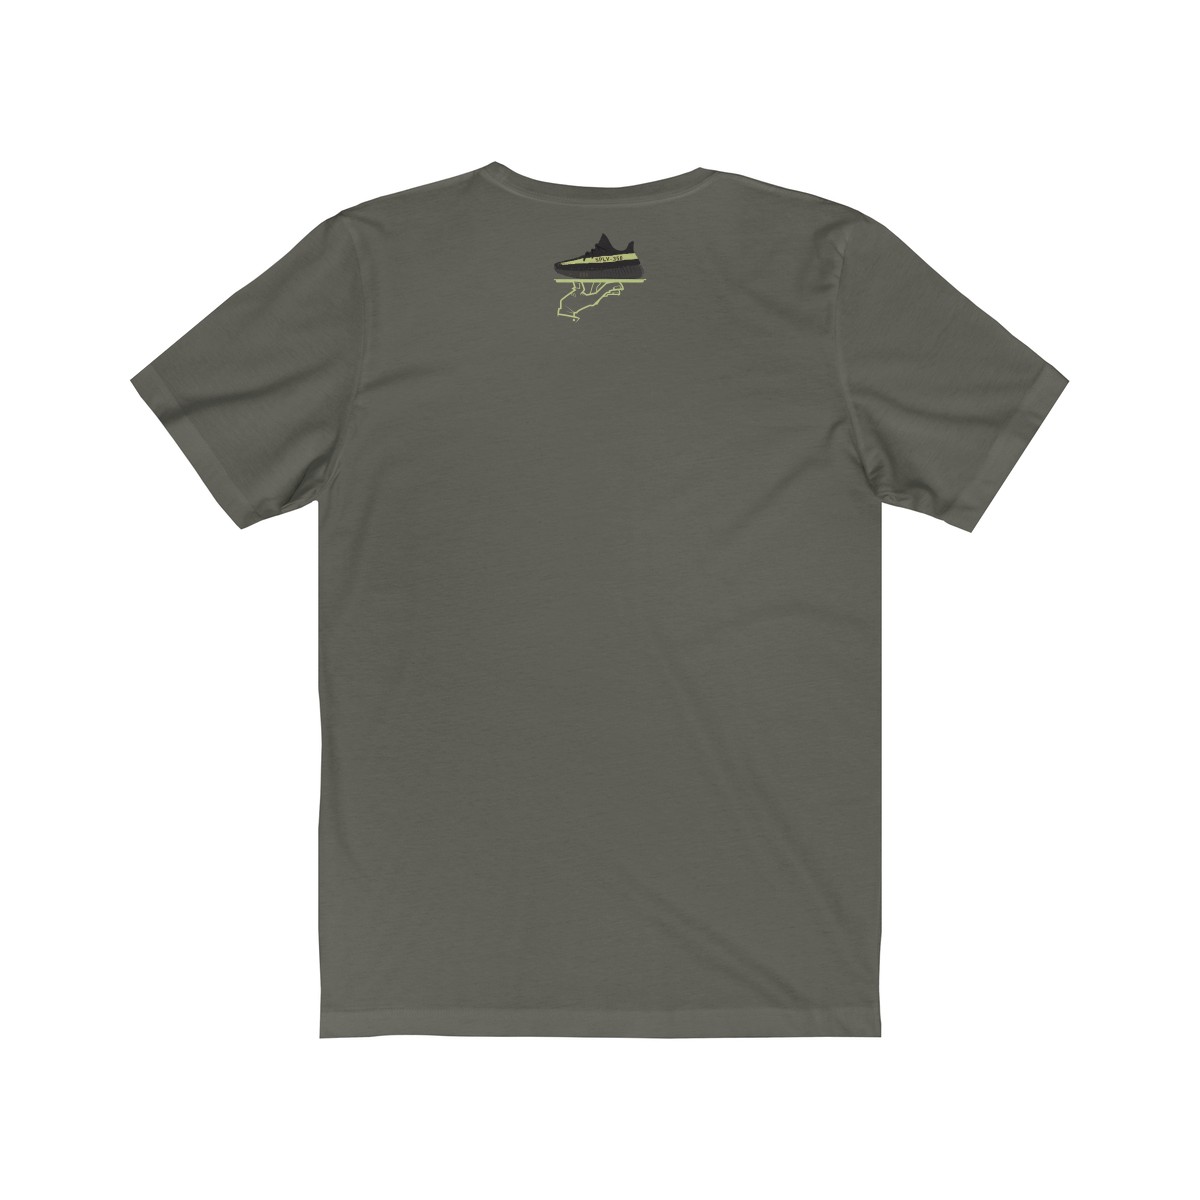 Now Serving Deluxe Yeezy Boost 350 V2 Green T-Shirt